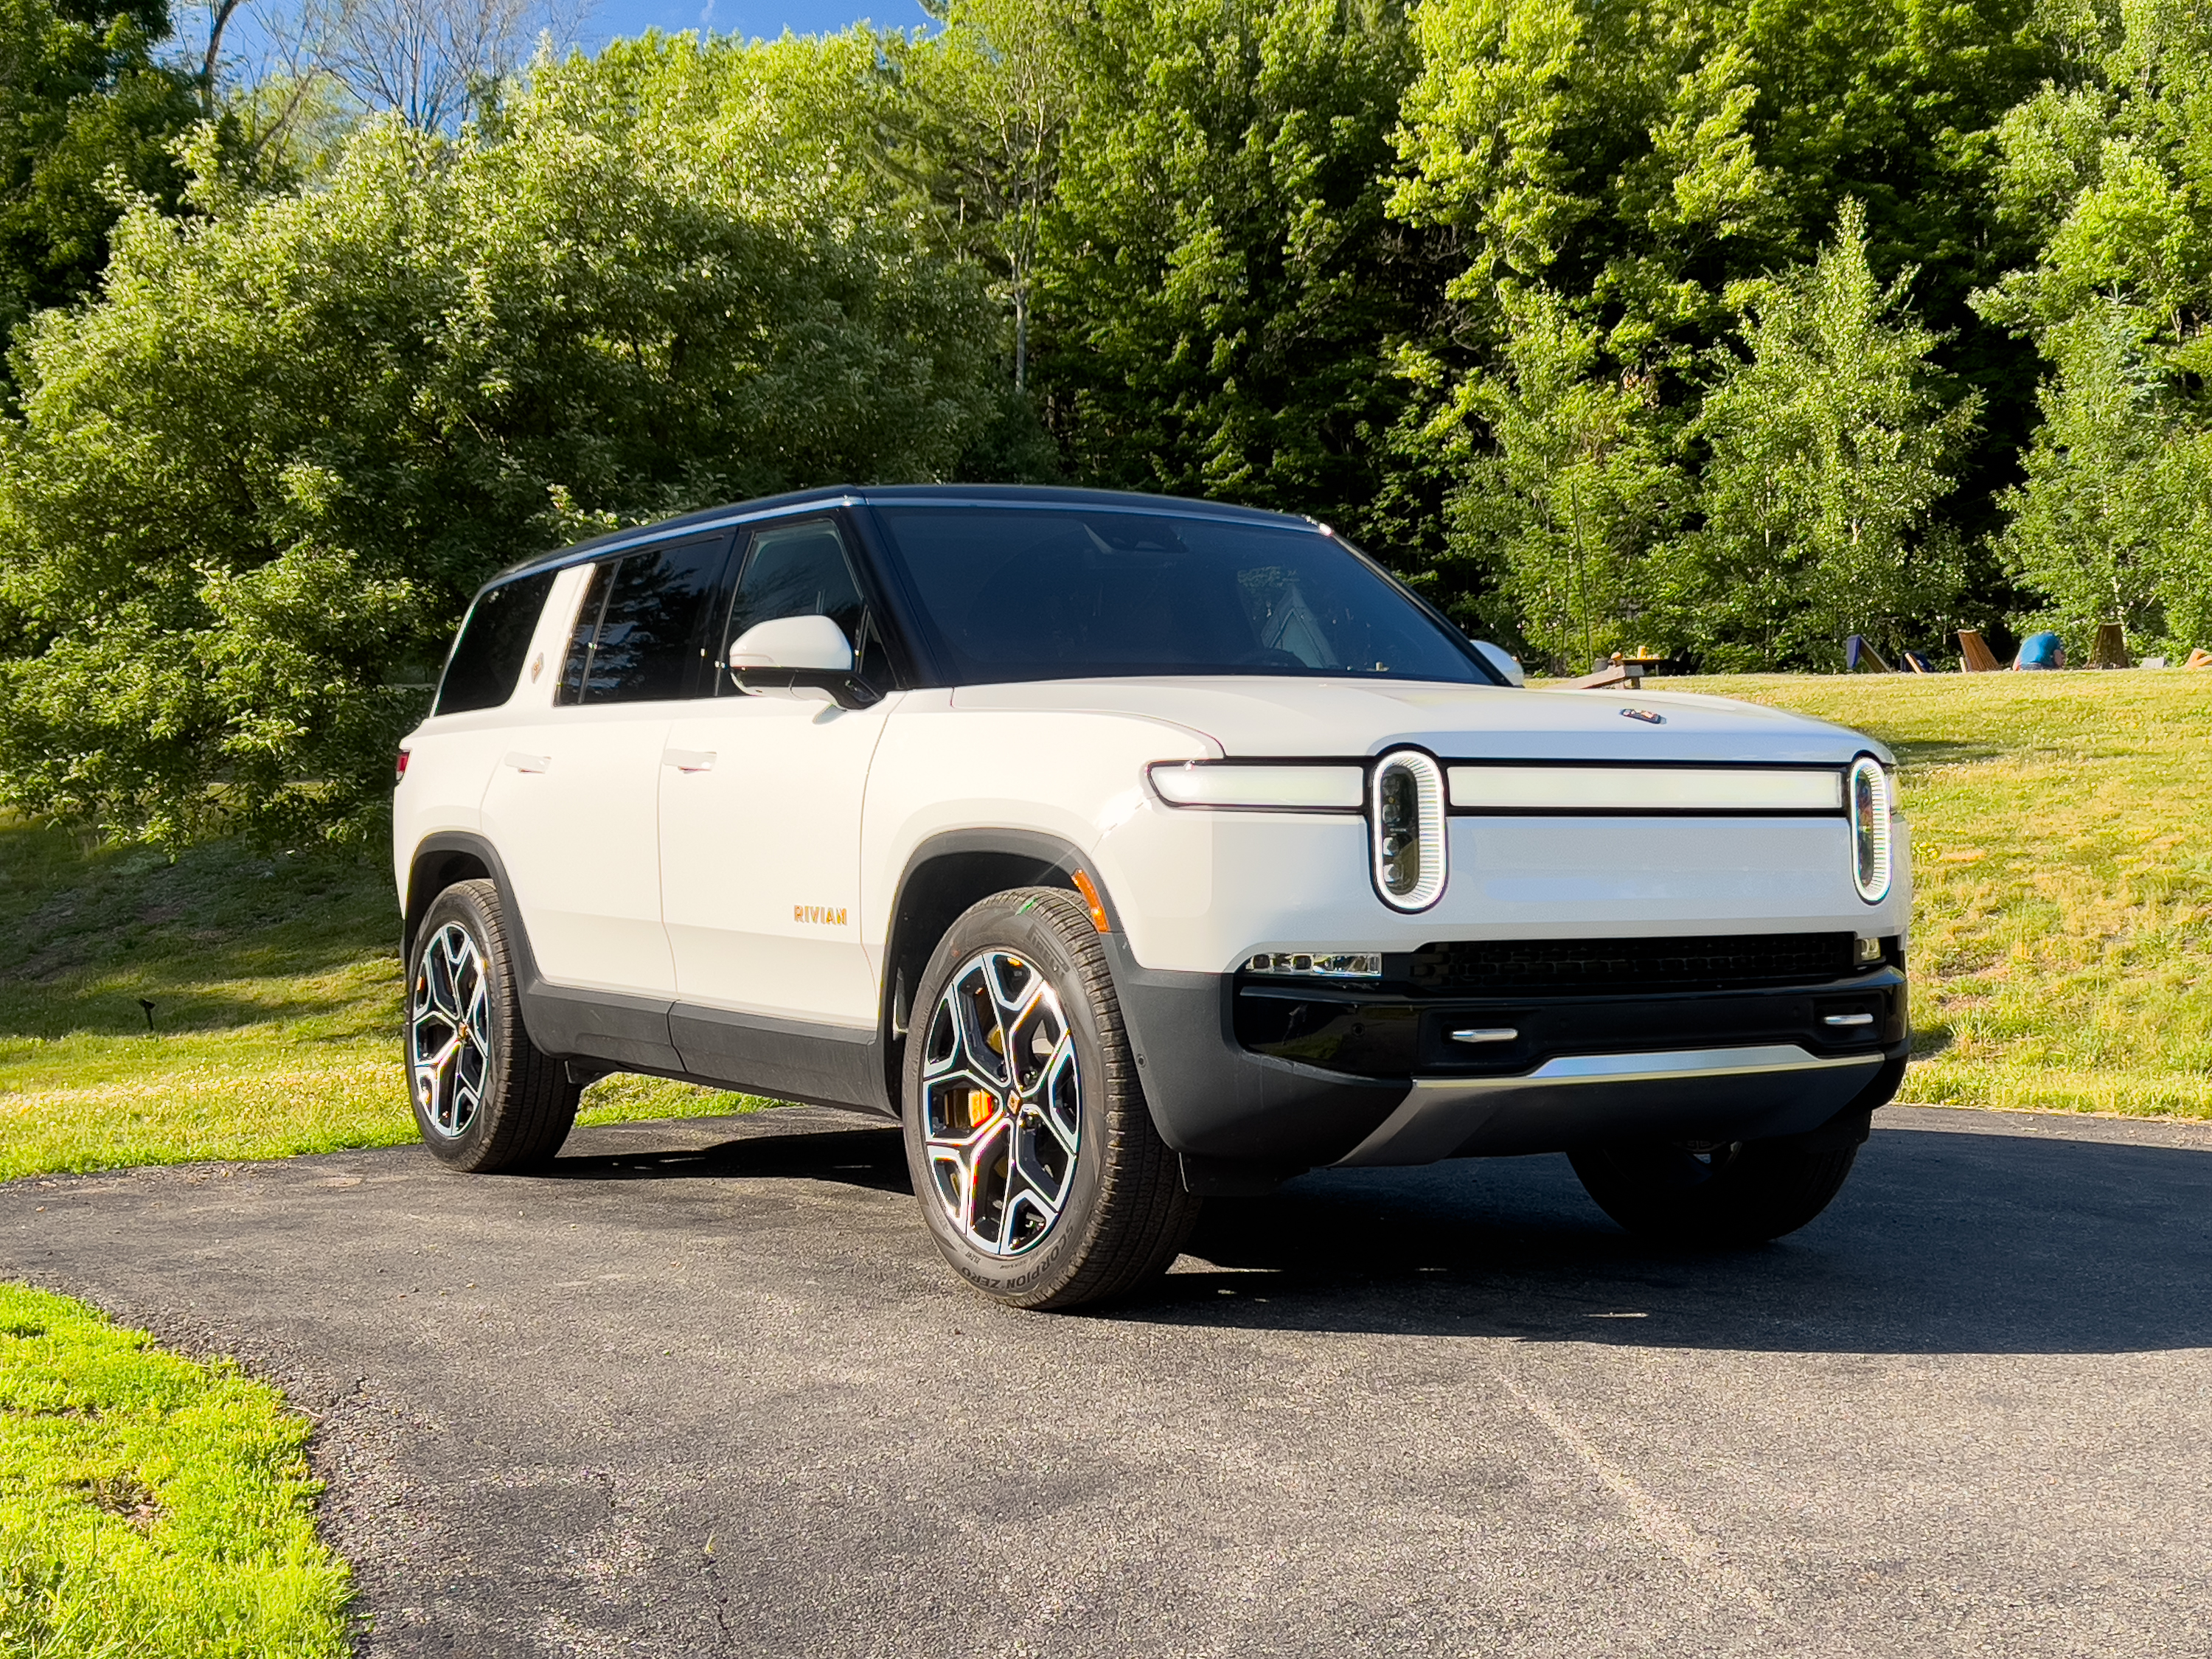 Why the Rivian R1S Luxury SUV is Winning Over Customers with Its Offroad Capabilities and Stylish Design